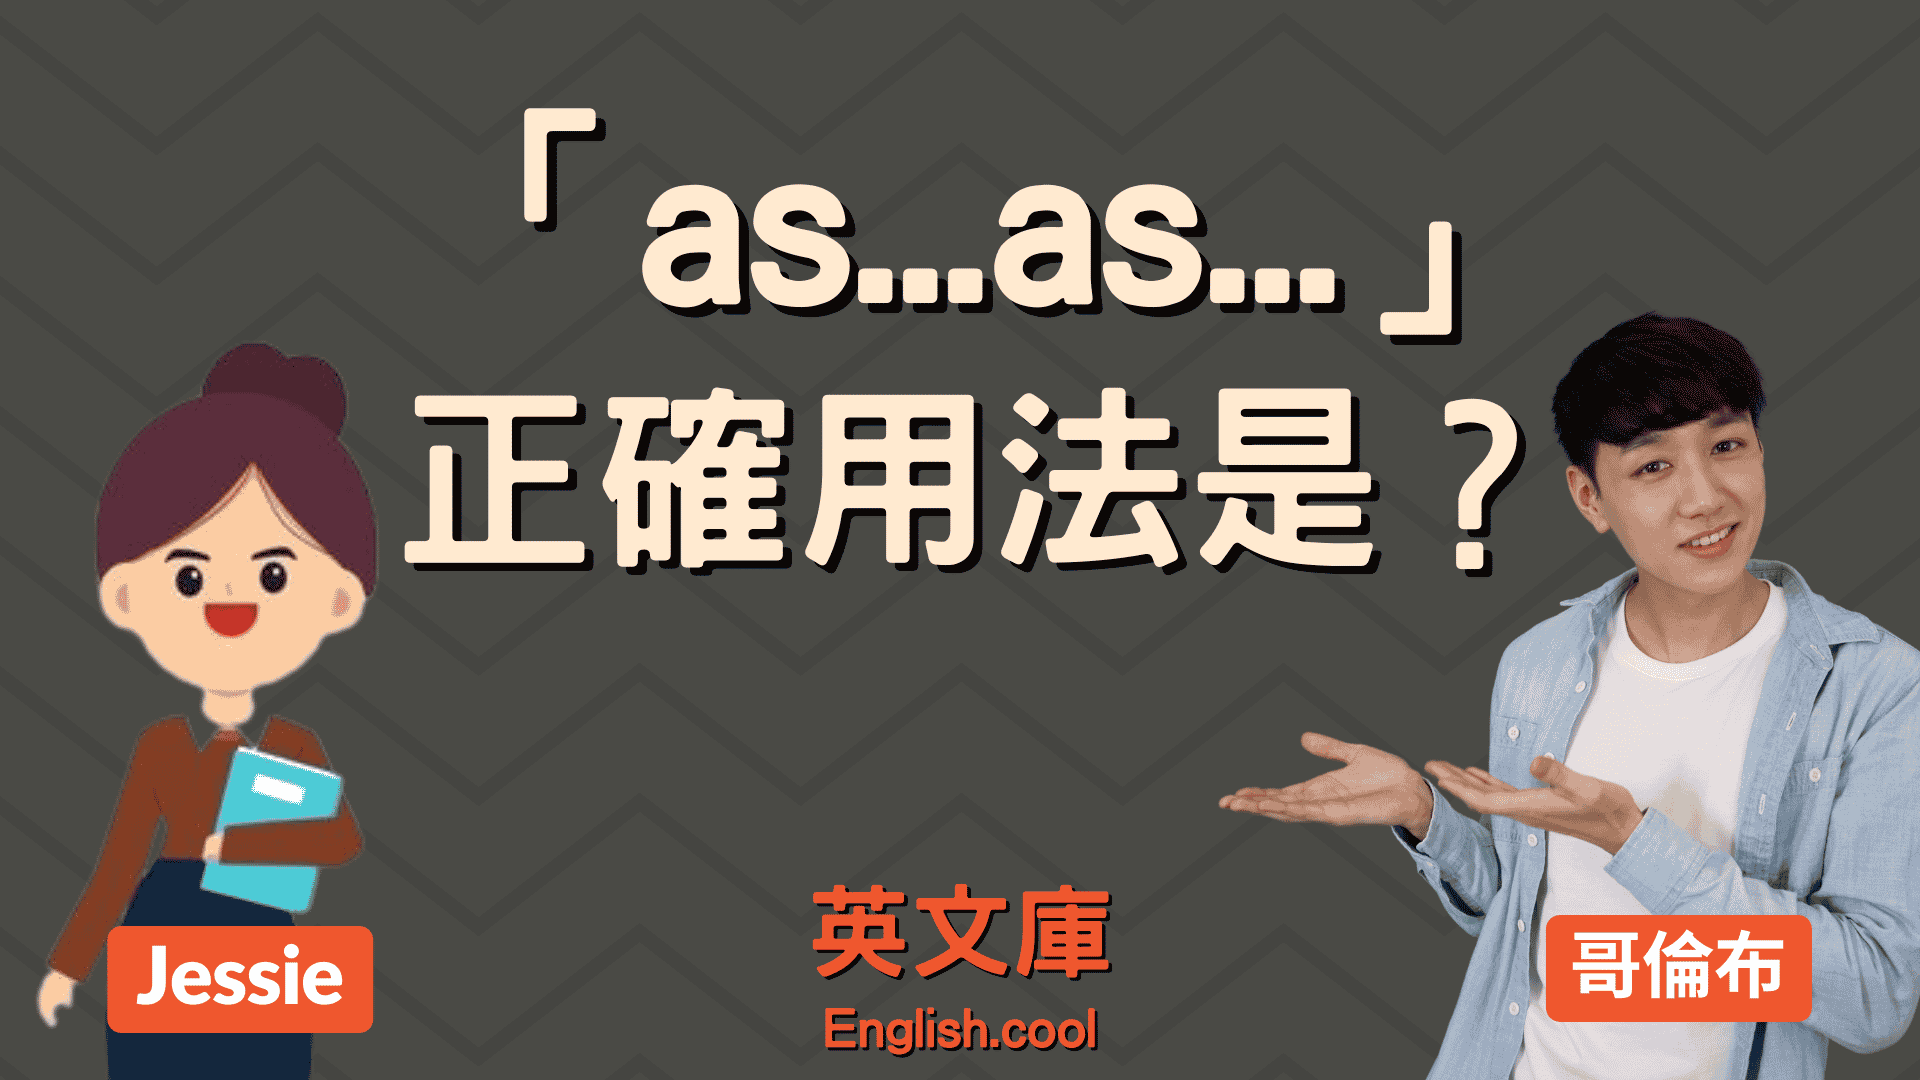 You are currently viewing 「as…as…」正確用法是？來看例句學比較性句型！